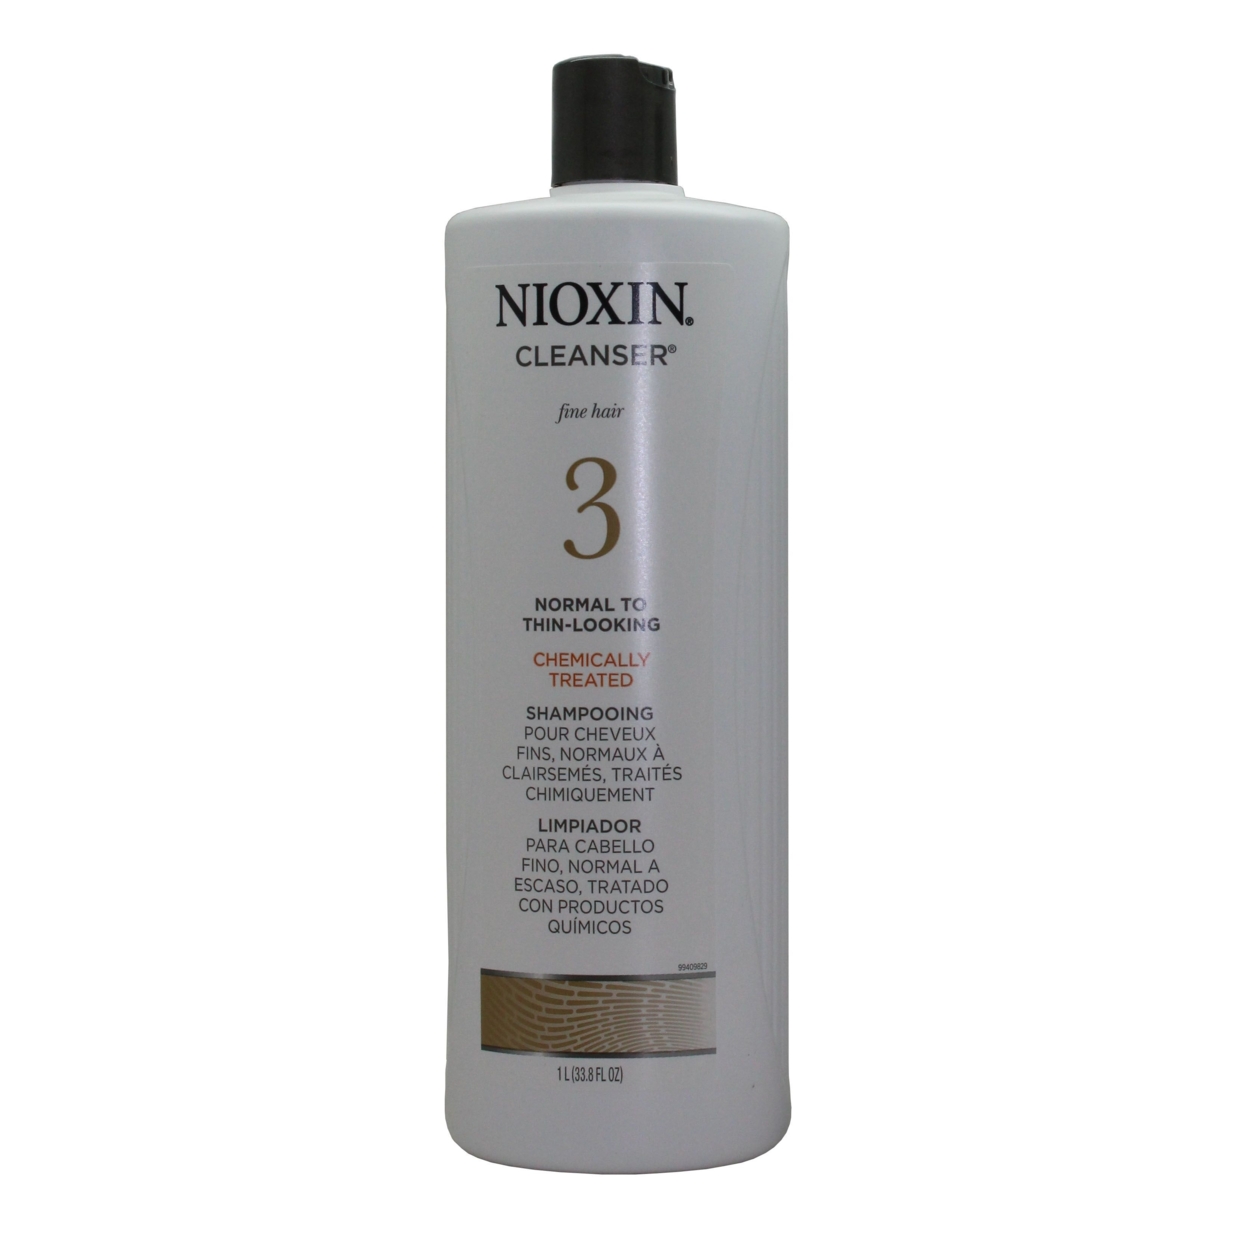 Nioxin System 3 Cleanser Shampoo, for Light Thinning Colored Hair, 33.8 oz - image 1 of 6